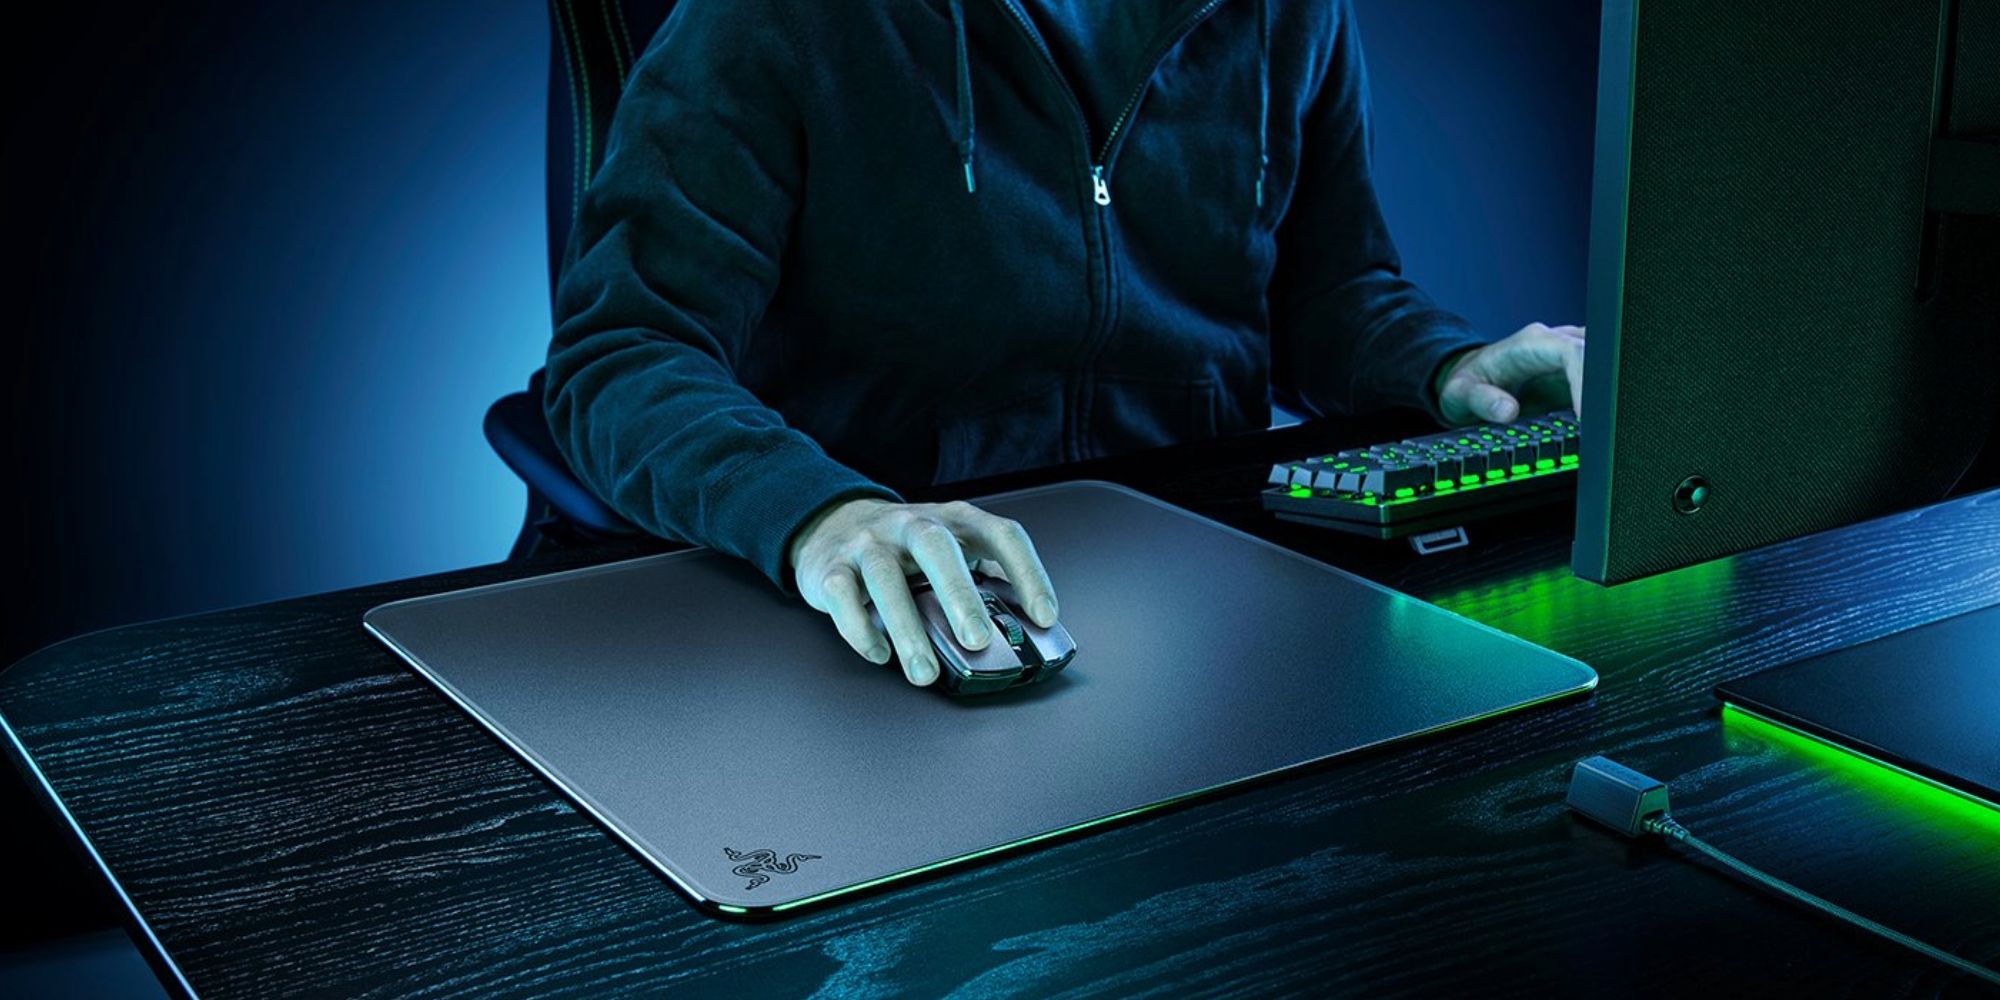 A person using a wireless mouse rests their hand on a black glass mouse pad.